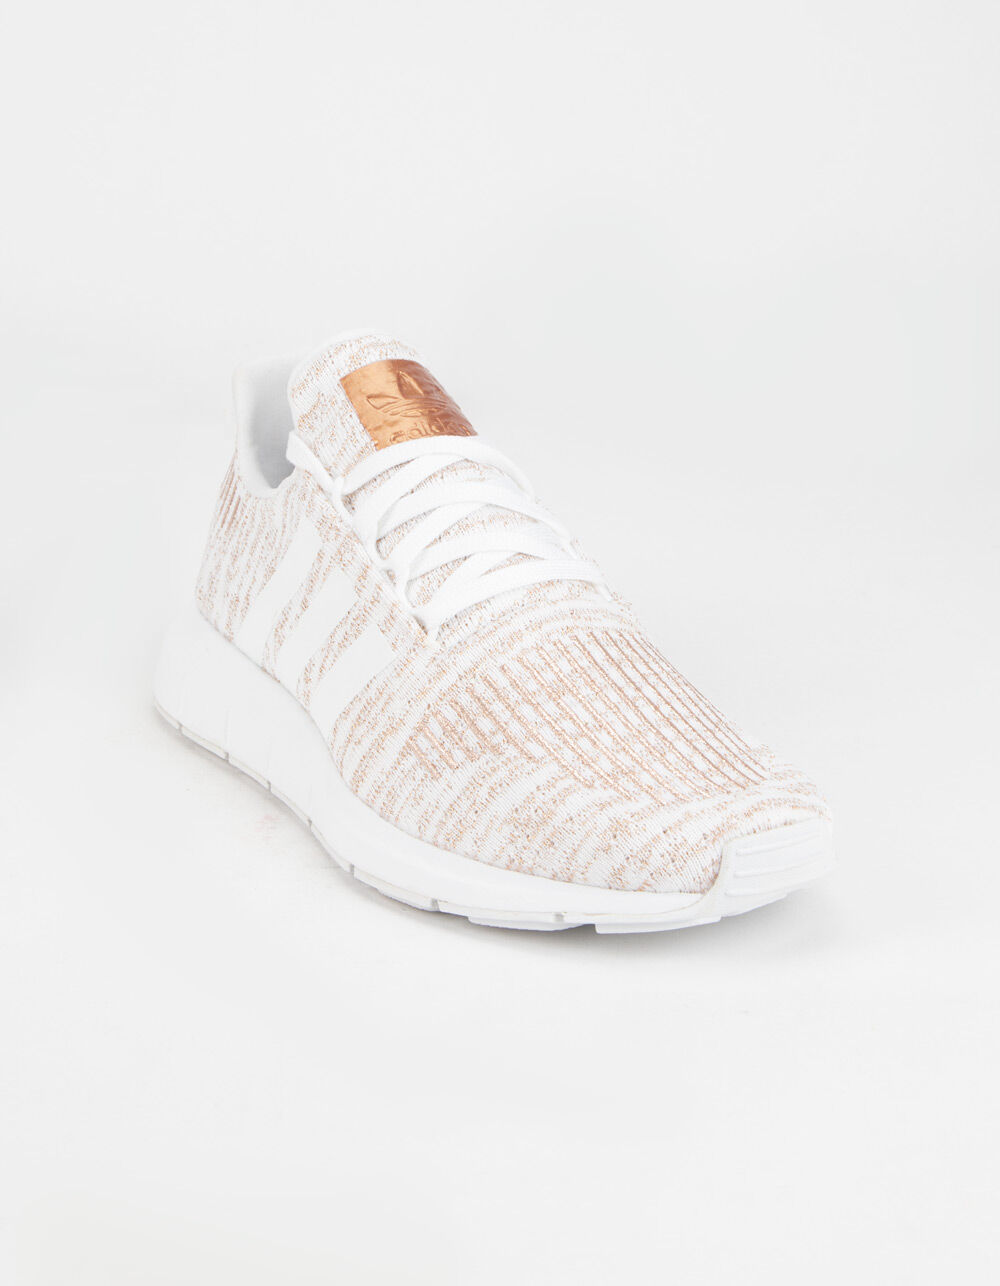 dutje Steil thema ADIDAS Swift Run White & Rose Gold Womens Shoes - WHITE COMBO | Tillys